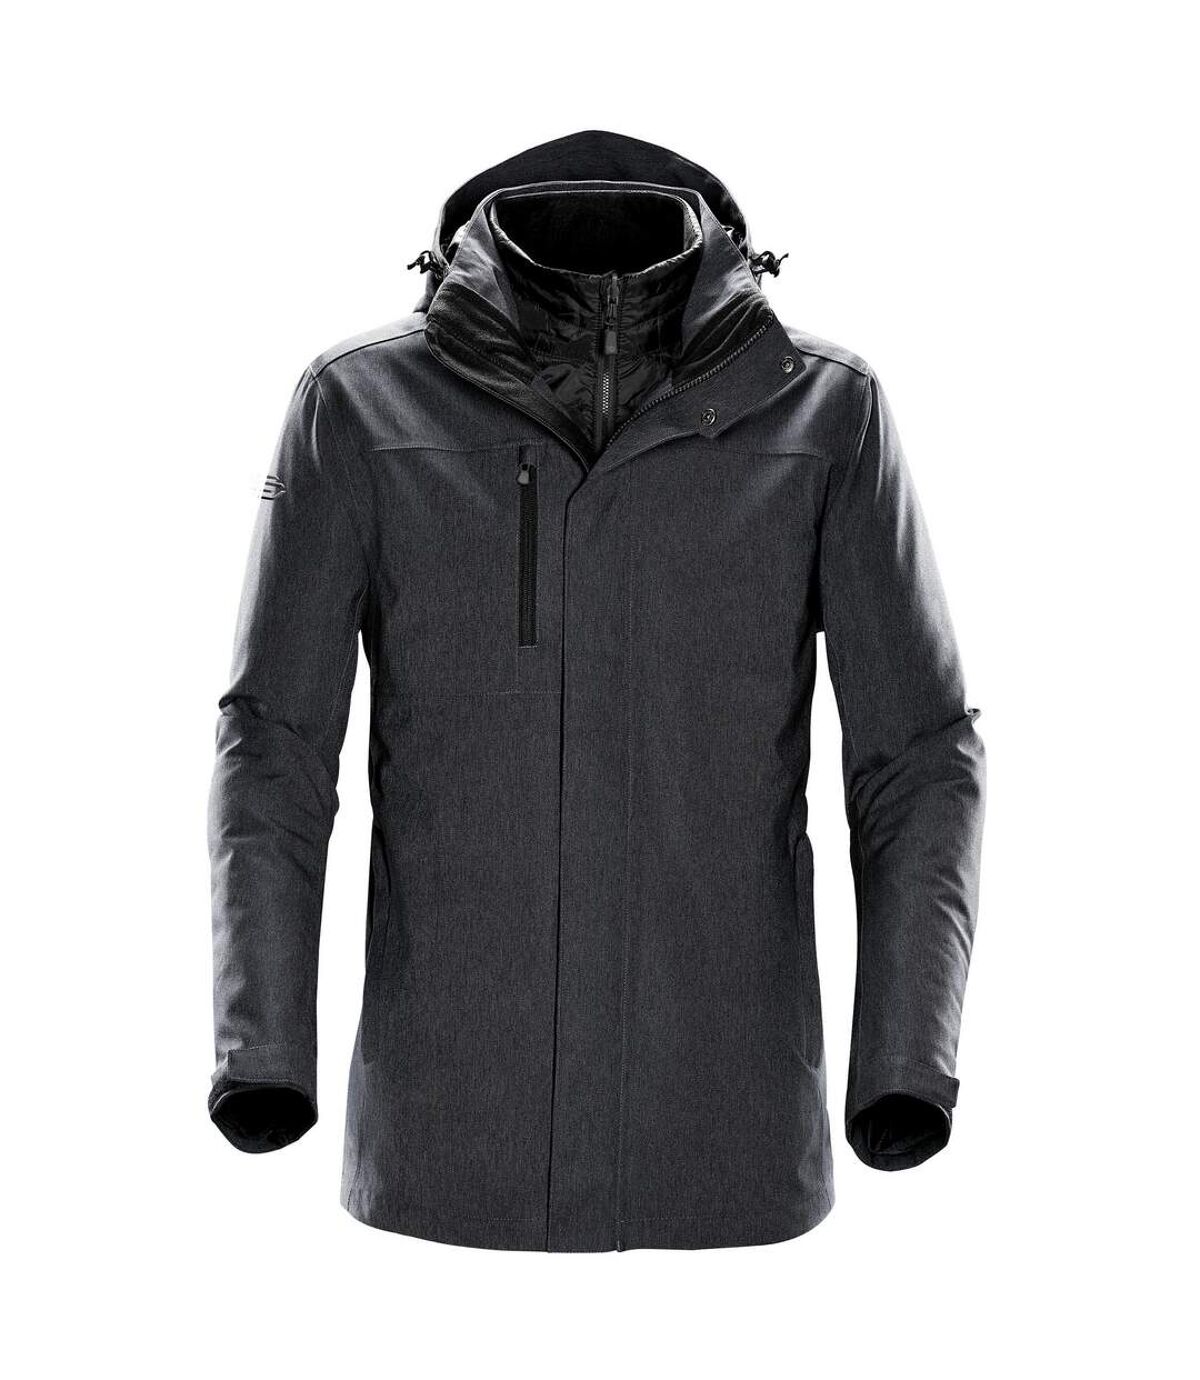 Stormtech Mens Avalanche System Jacket (Charcoal Twill)